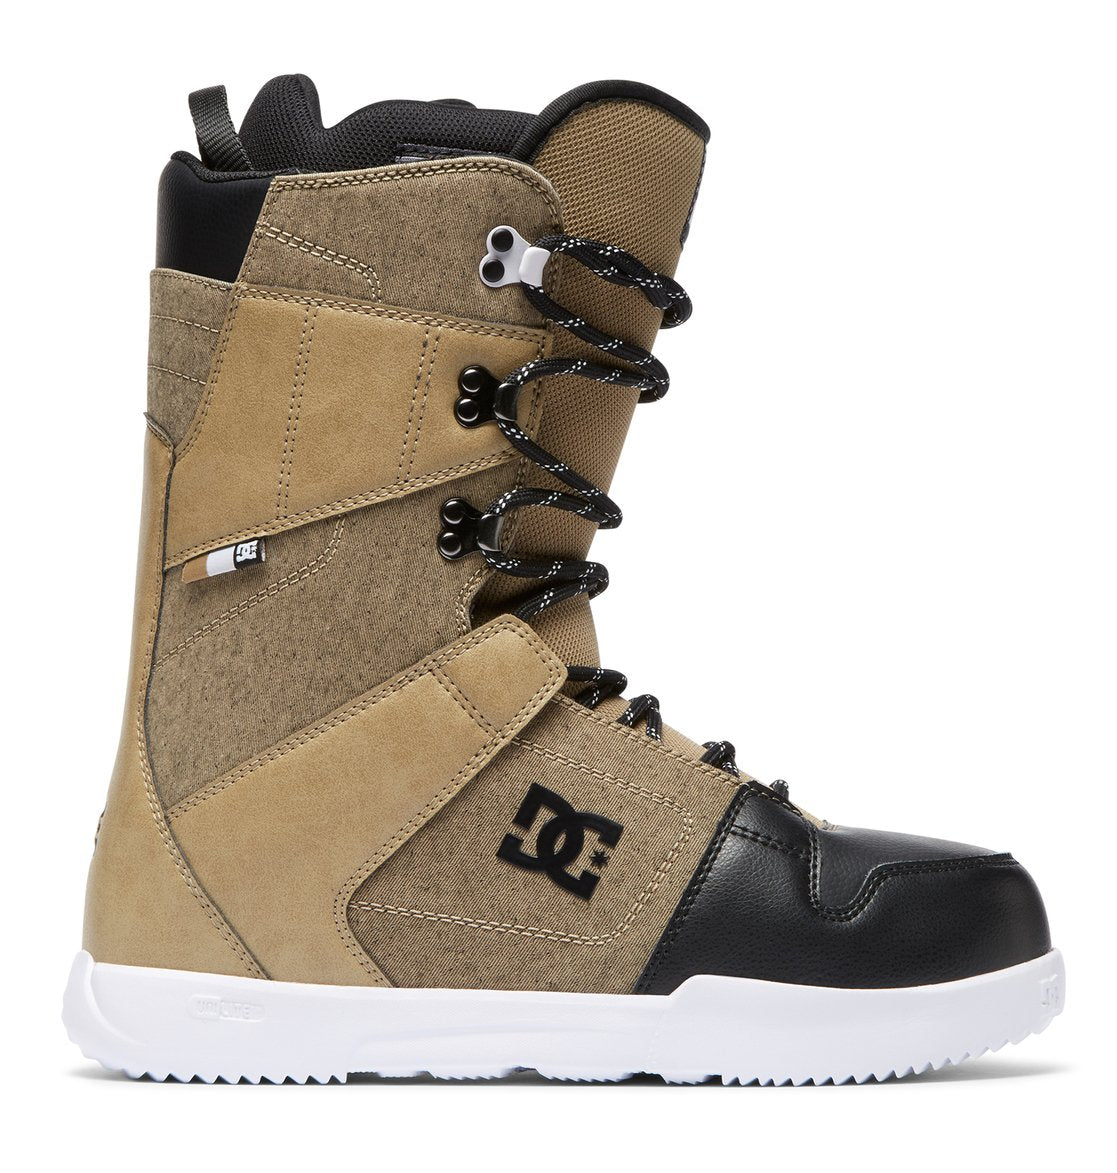 Vermeend Fantasierijk laden DC Shoes Mens Phase Lace Up Snowboard Boots ADYO200038